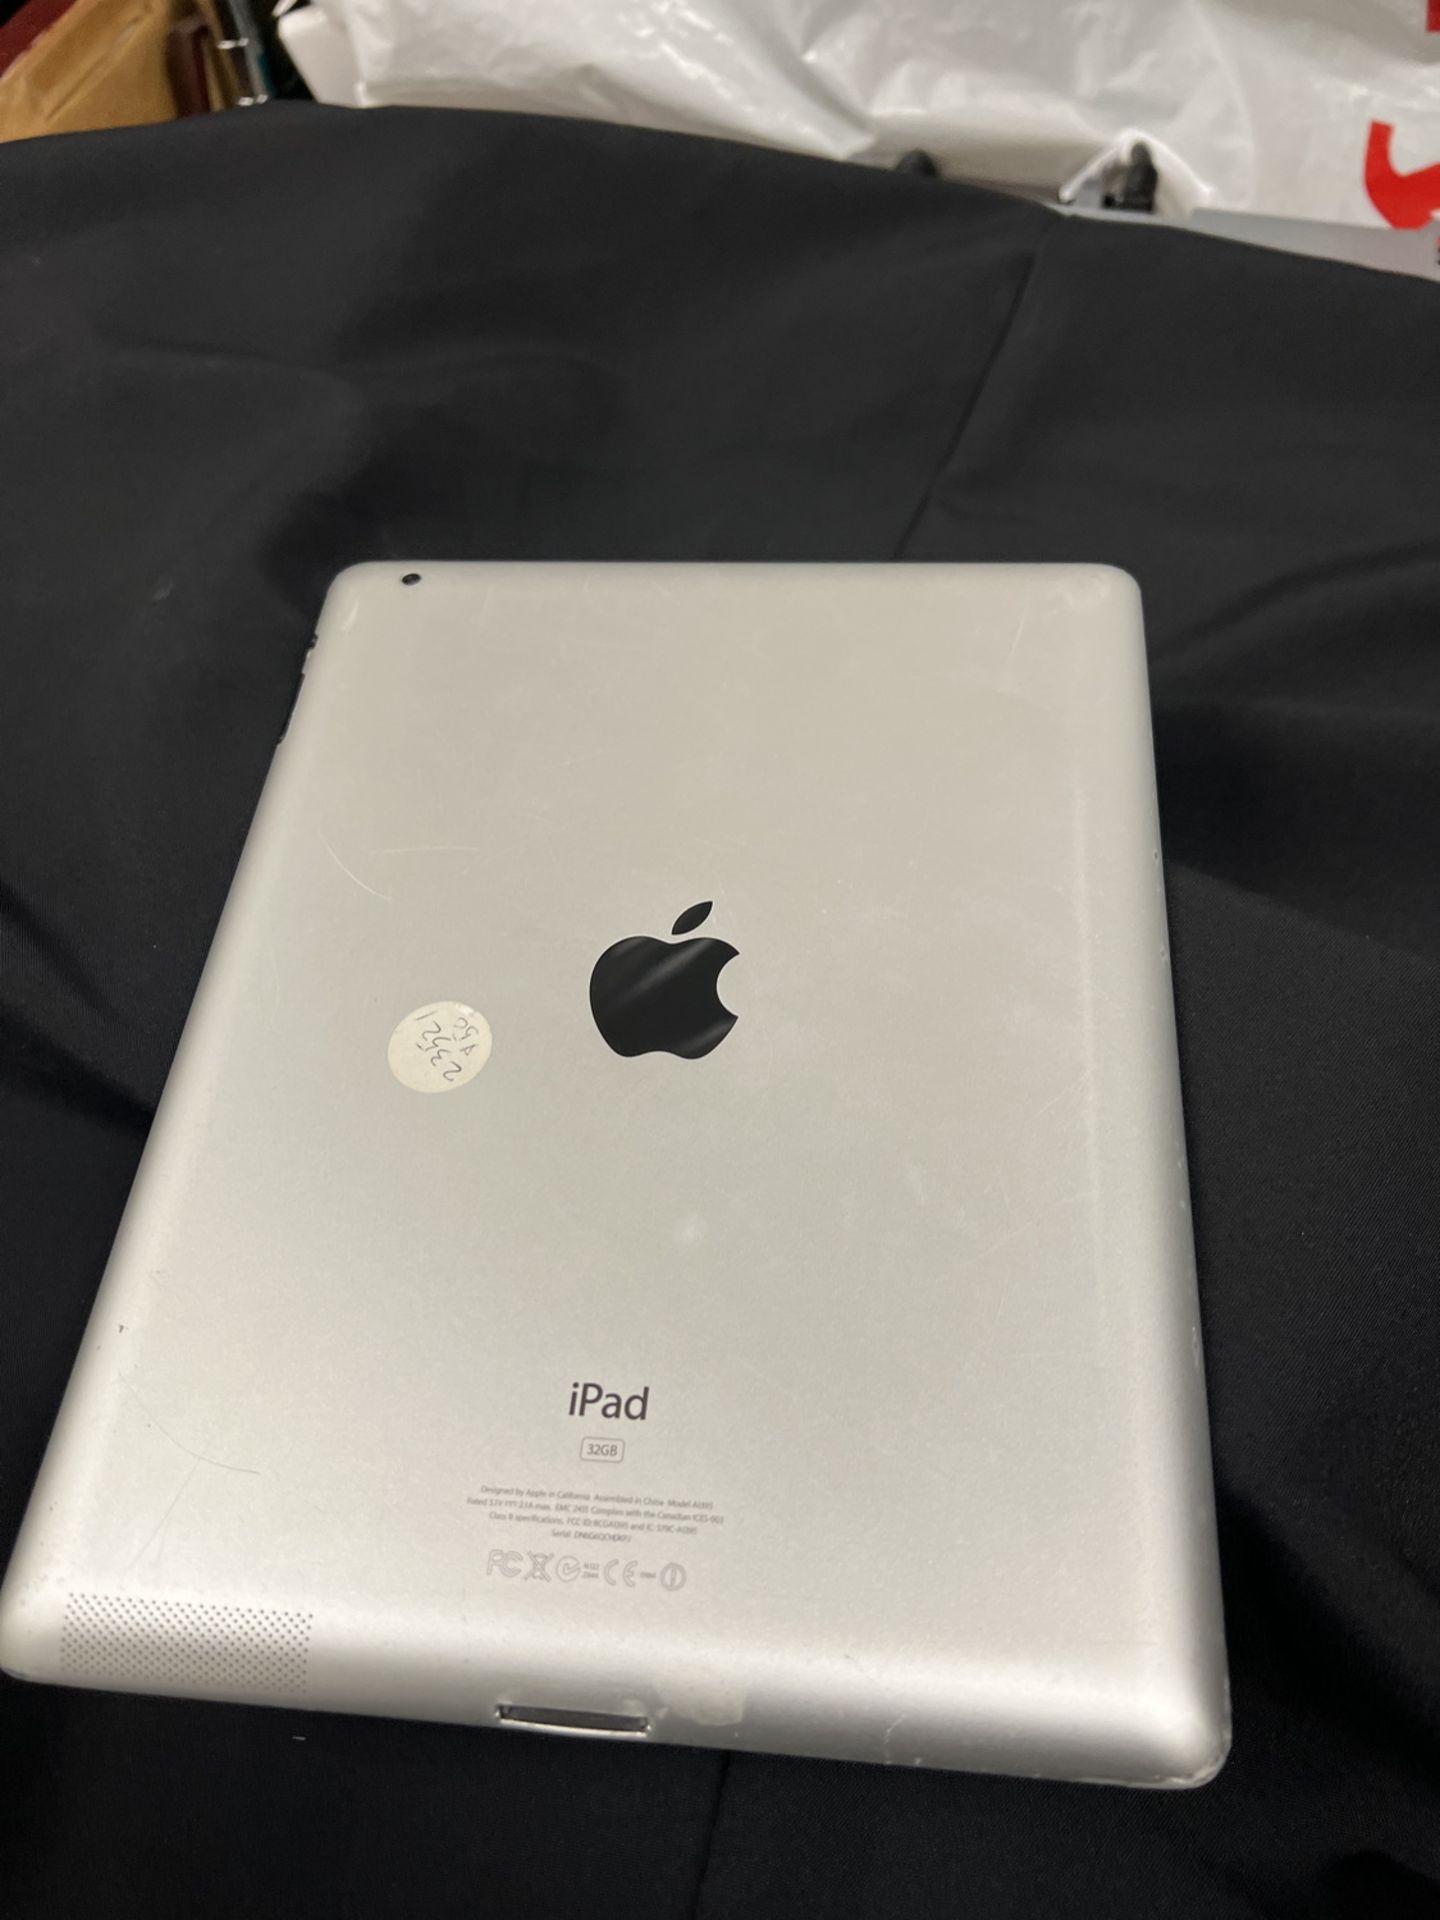 APPLE IPAD 2 (A1395) TABLET - 32GB - WHITE - Image 2 of 3